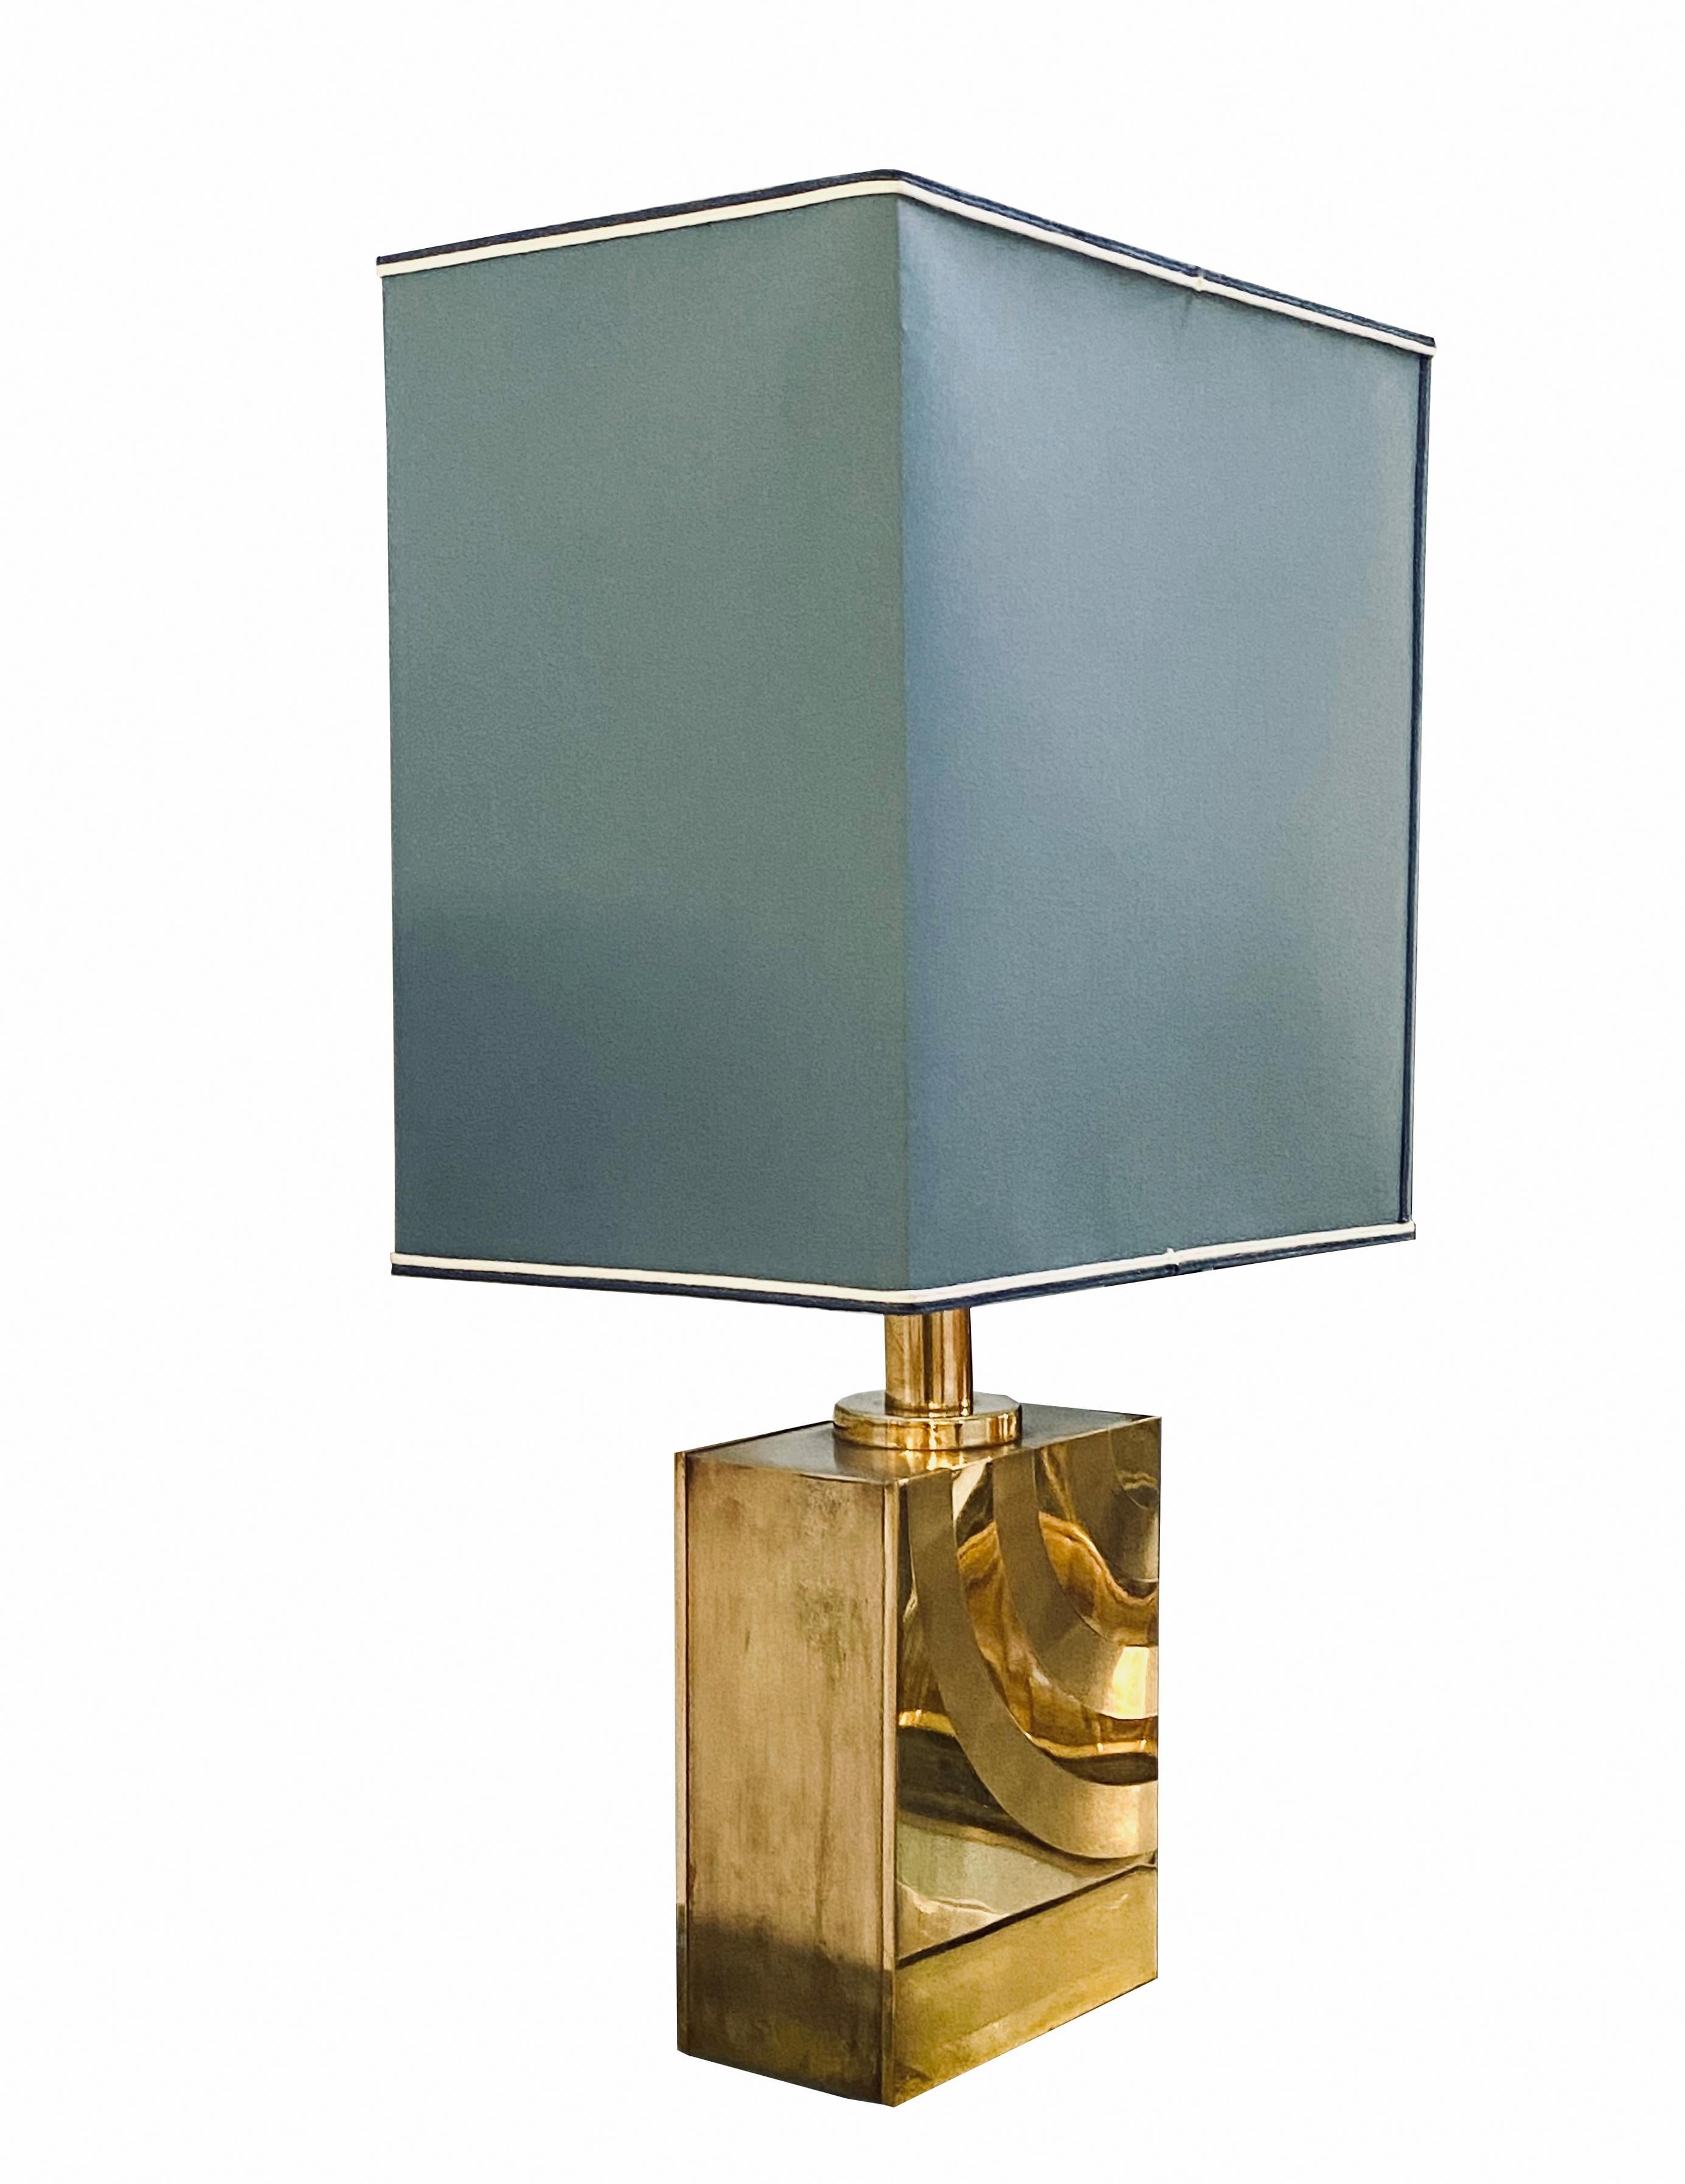 A majestic 1970s Italian table lamp in polished gilt solid brass with beautiful graphic engraving and new fabric shade in the same style as the original used one.